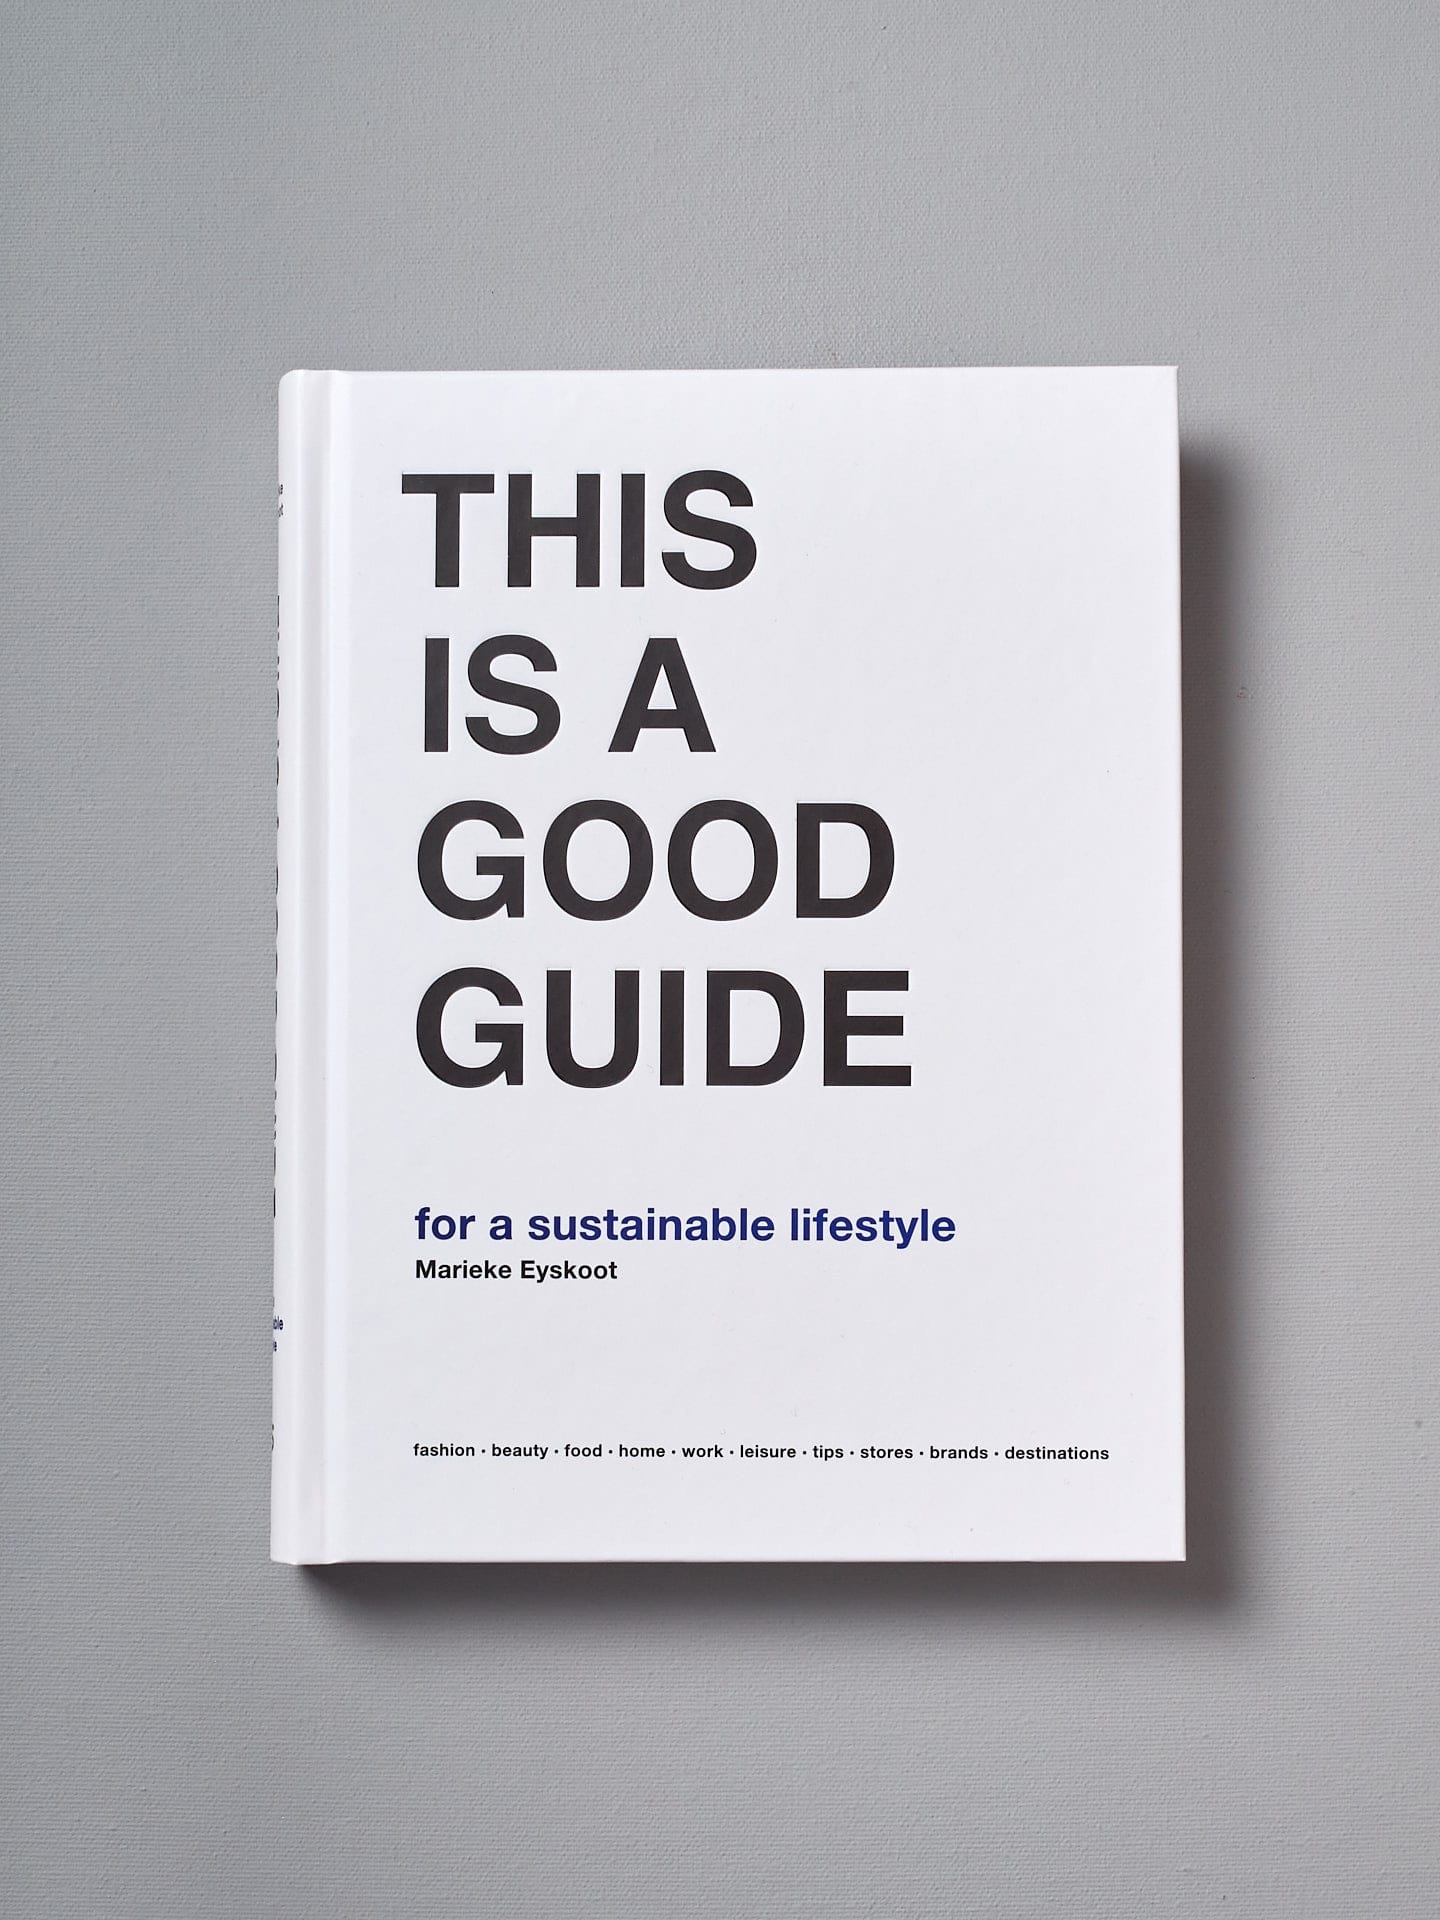 Marieke Eyskoot's "THIS IS A GOOD GUIDE - for a sustainable lifestyle" is a good guide for a sustainable lifestyle.